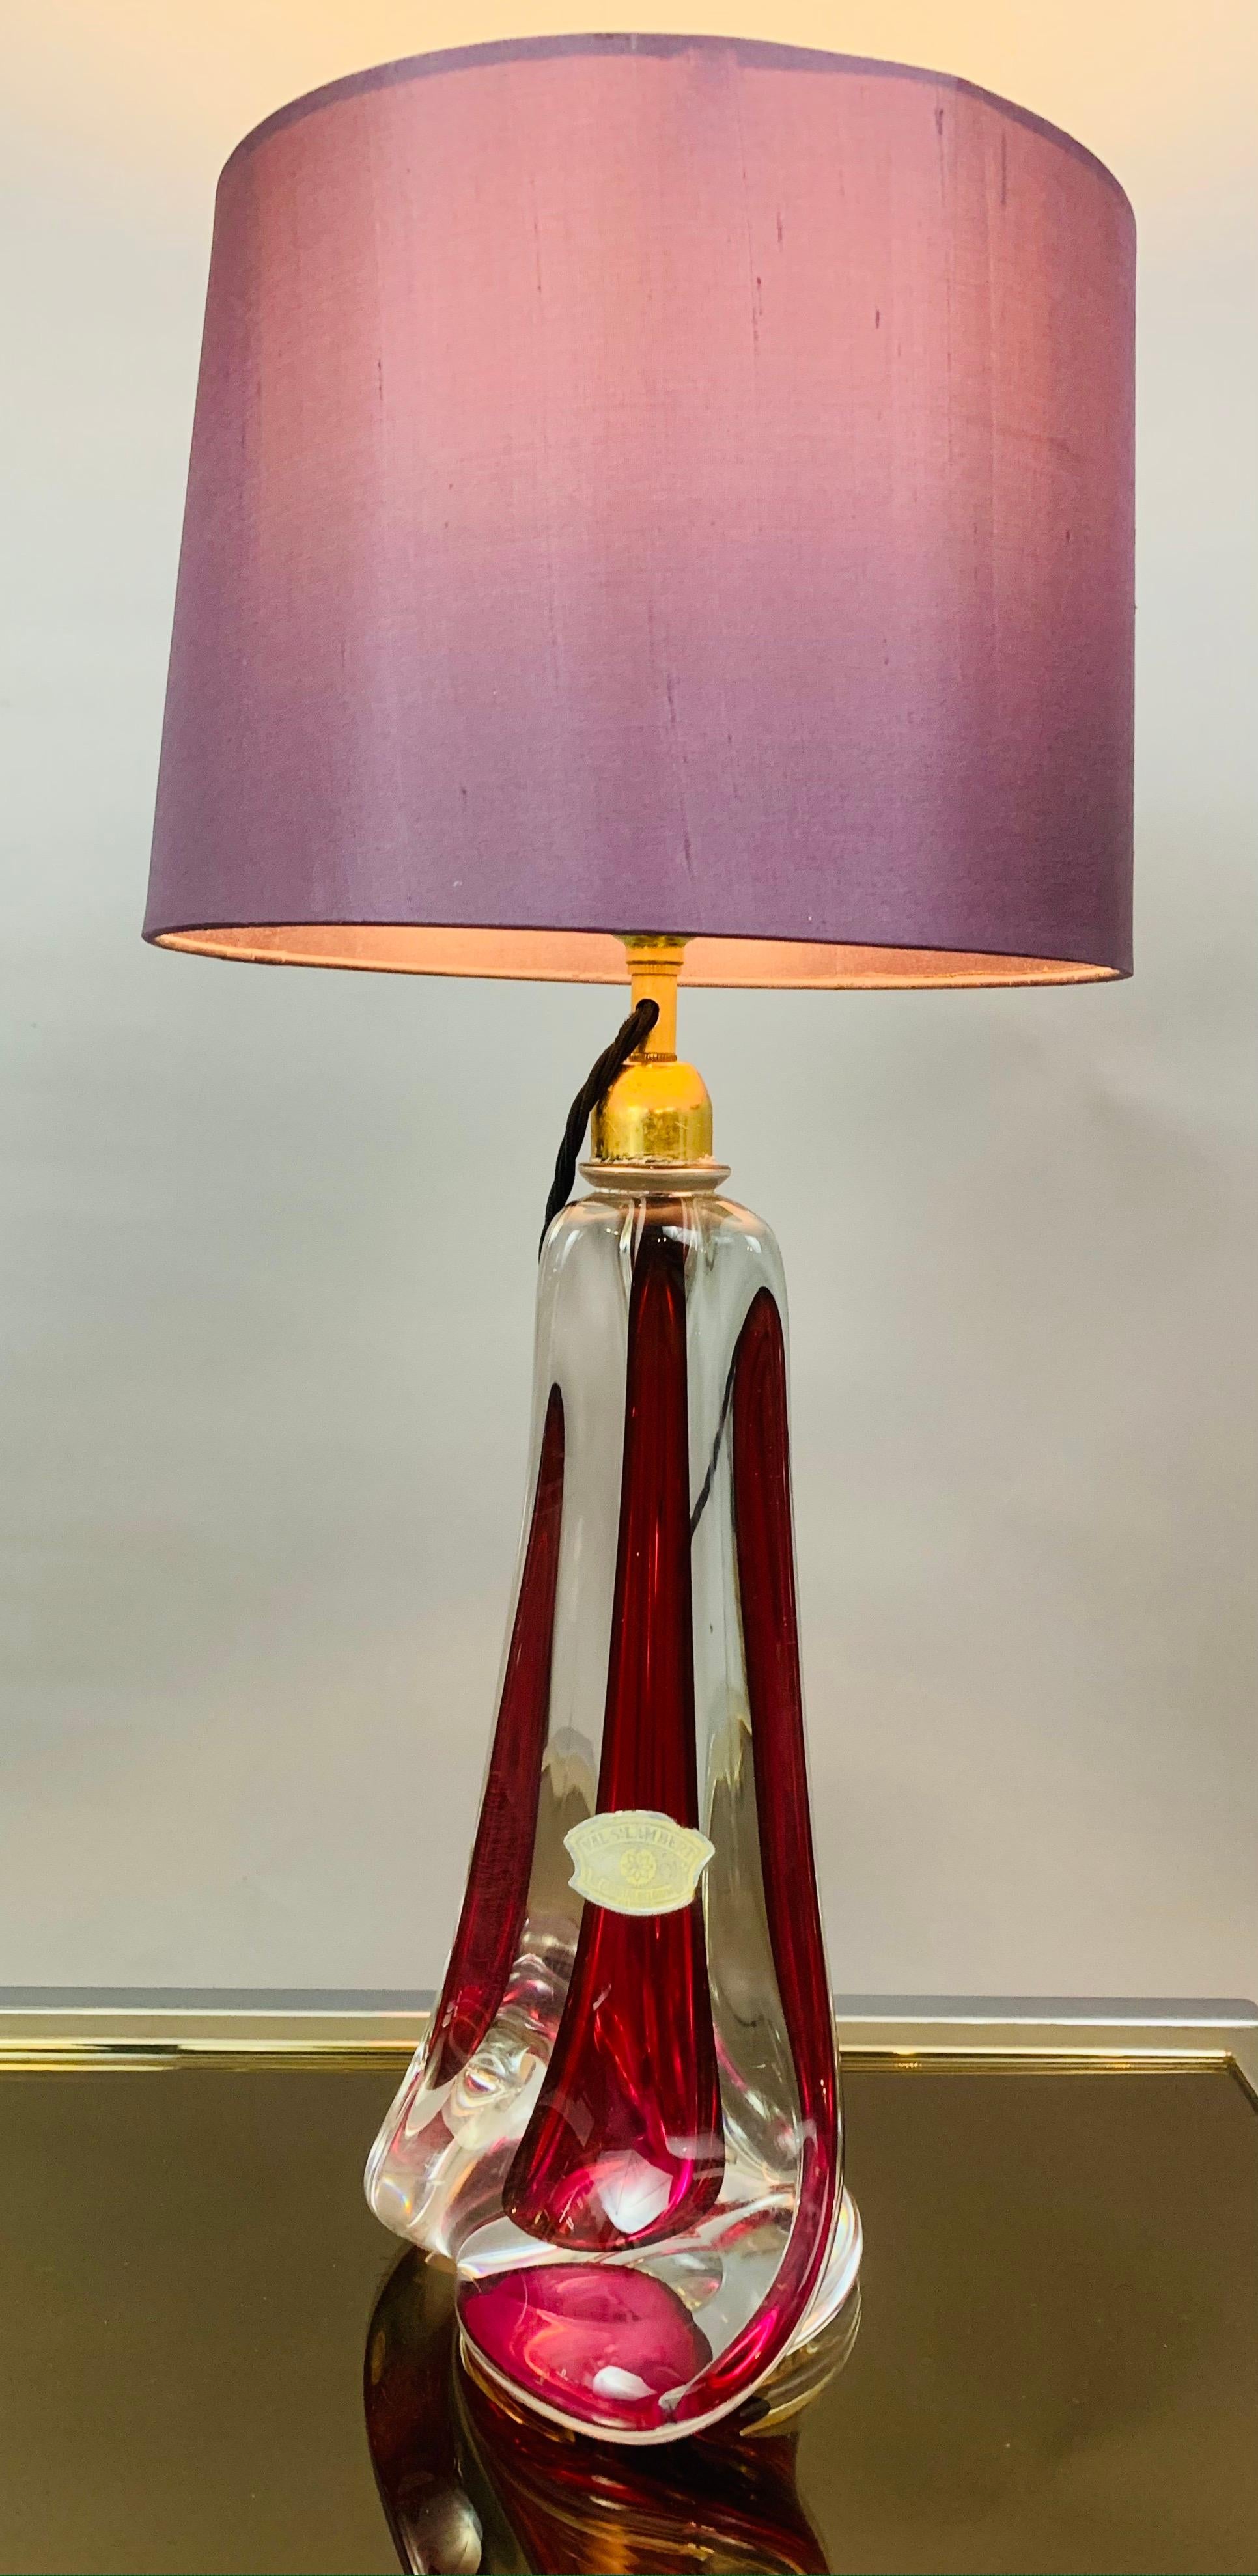 1950s Belgium Val Saint Lambert dark red and clear crystal glass table lamp of tapering geometric form with a brass mounted bayonet bulb socket. Hand Blown in heavy lead crystal glass which makes each one unique and slightly different even if